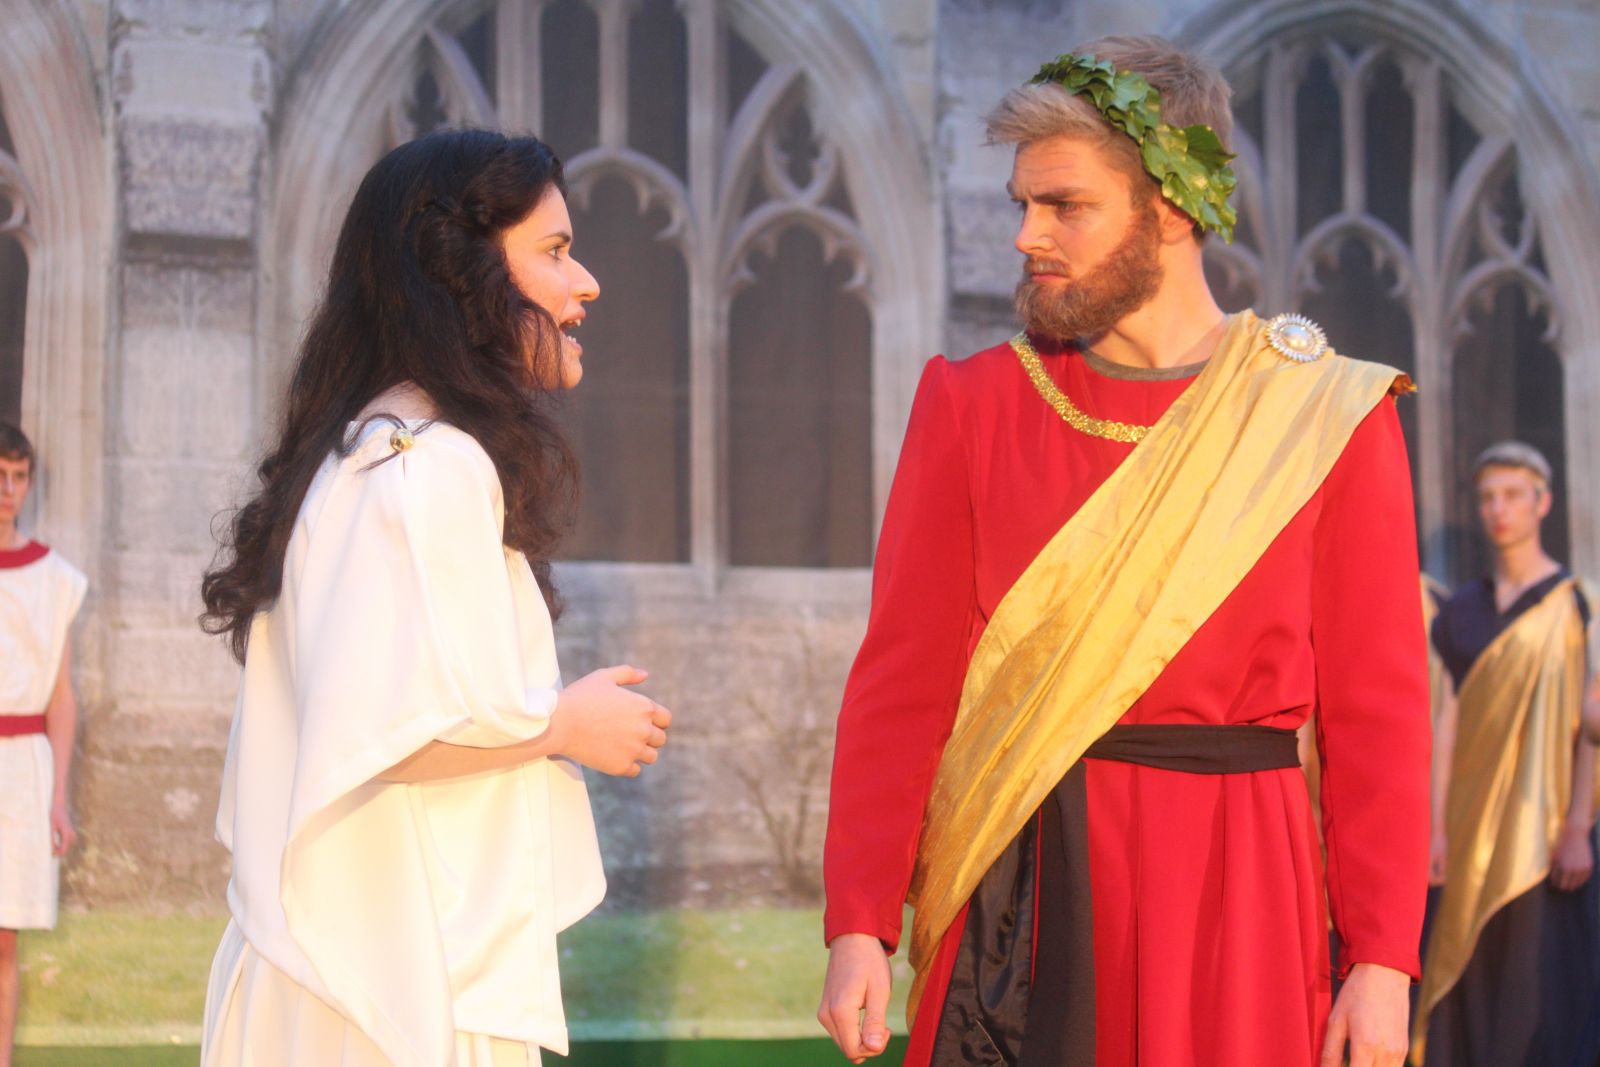 Sophocles Antigone, Oxford, New College Cloisters, 2016. Antigone confronts Creon. Tragic conflict in ancient costume.